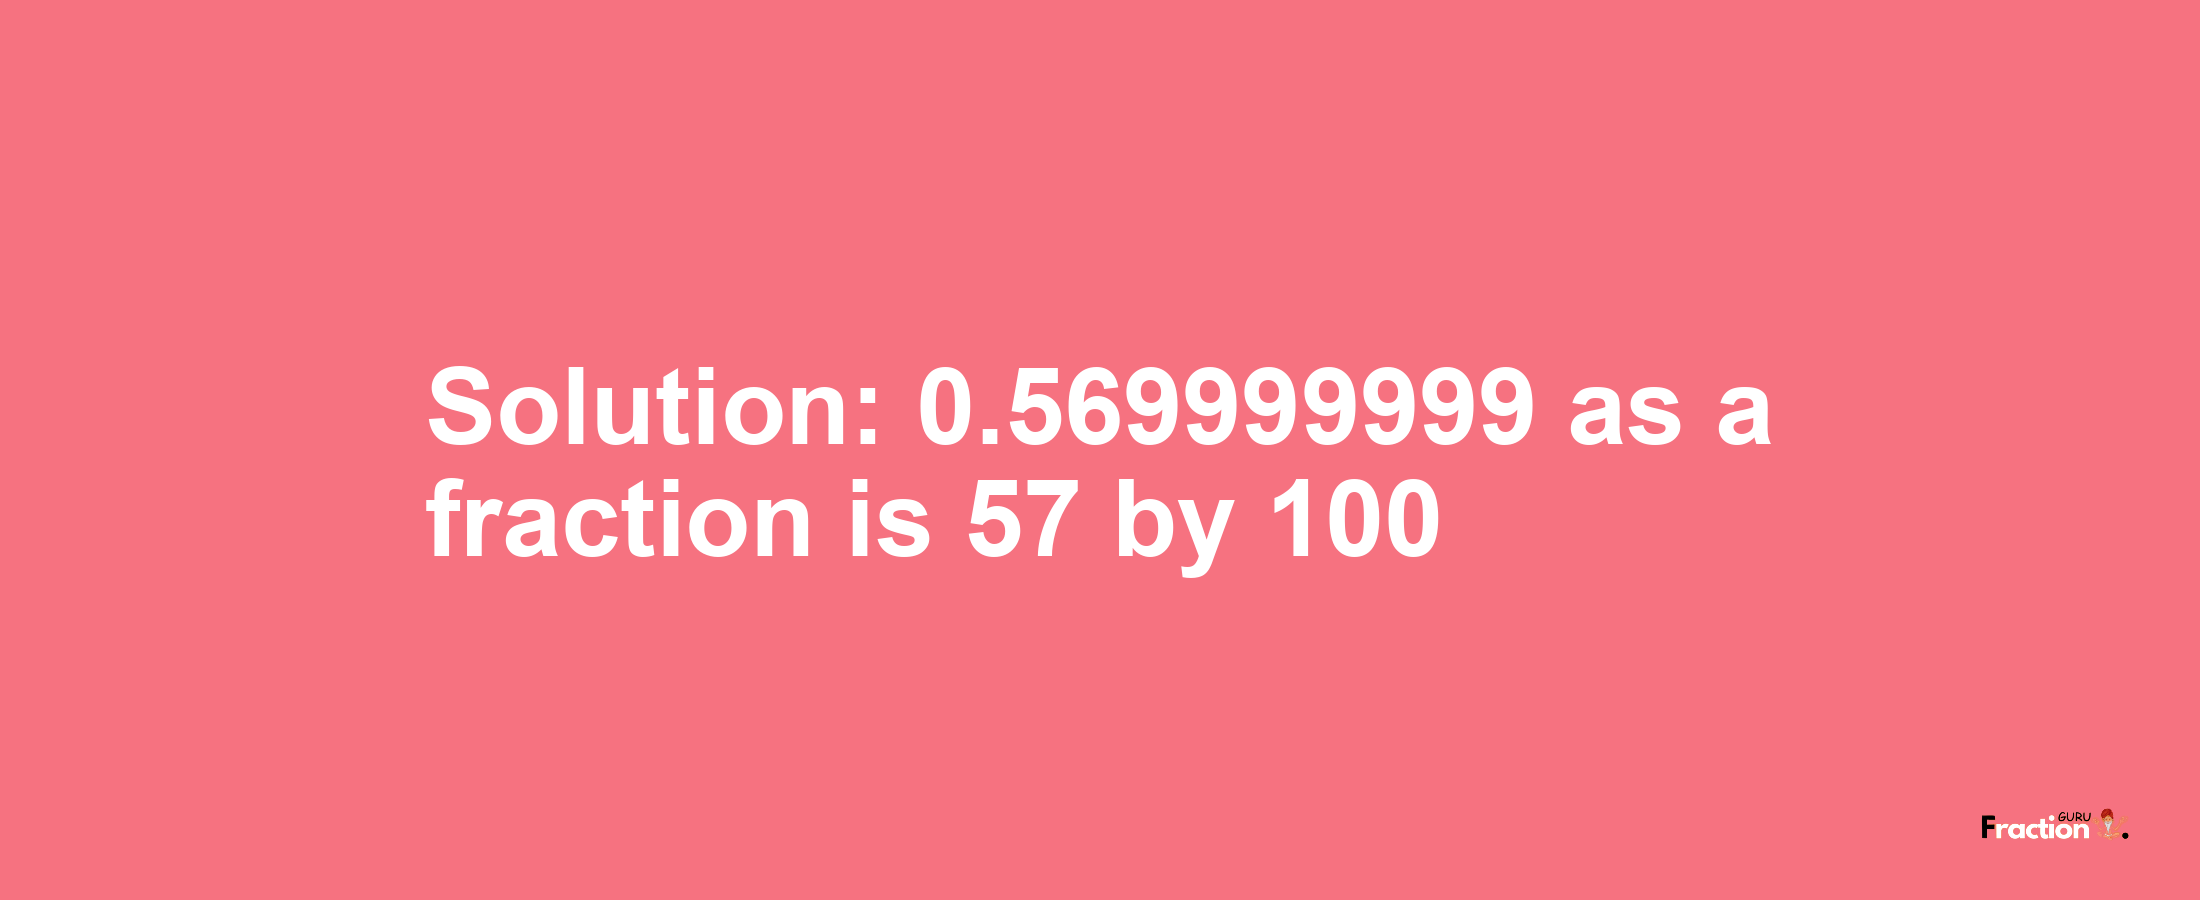 Solution:0.569999999 as a fraction is 57/100